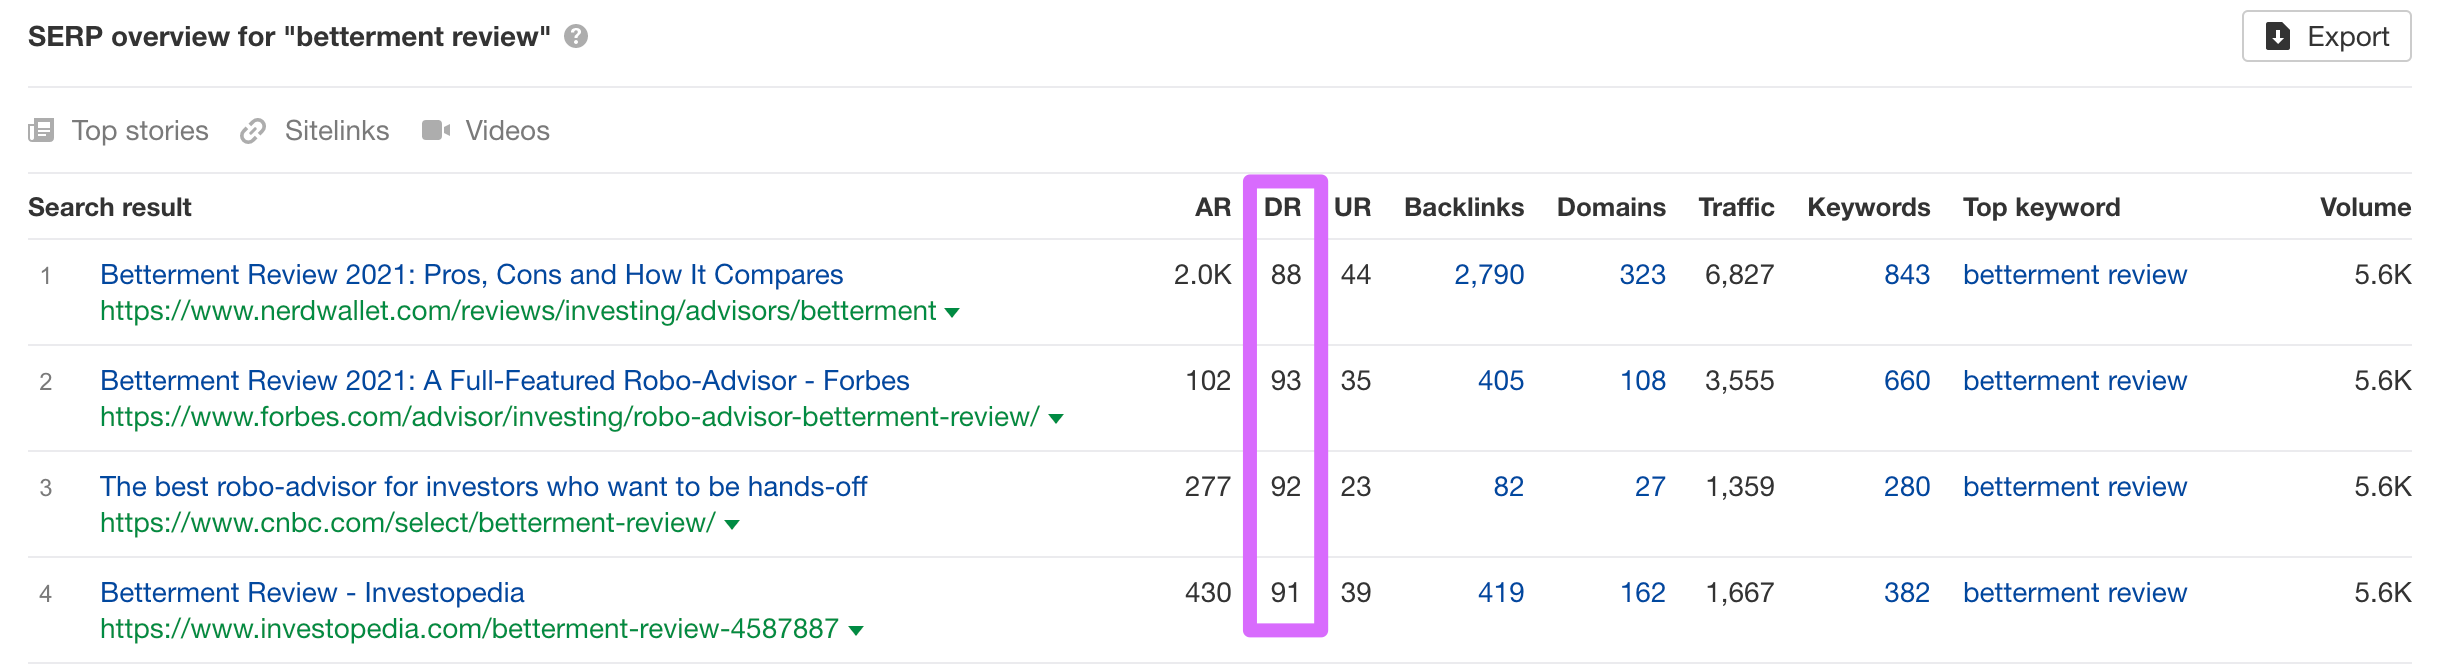 betterment review ranking posts in the serp on ahrefs